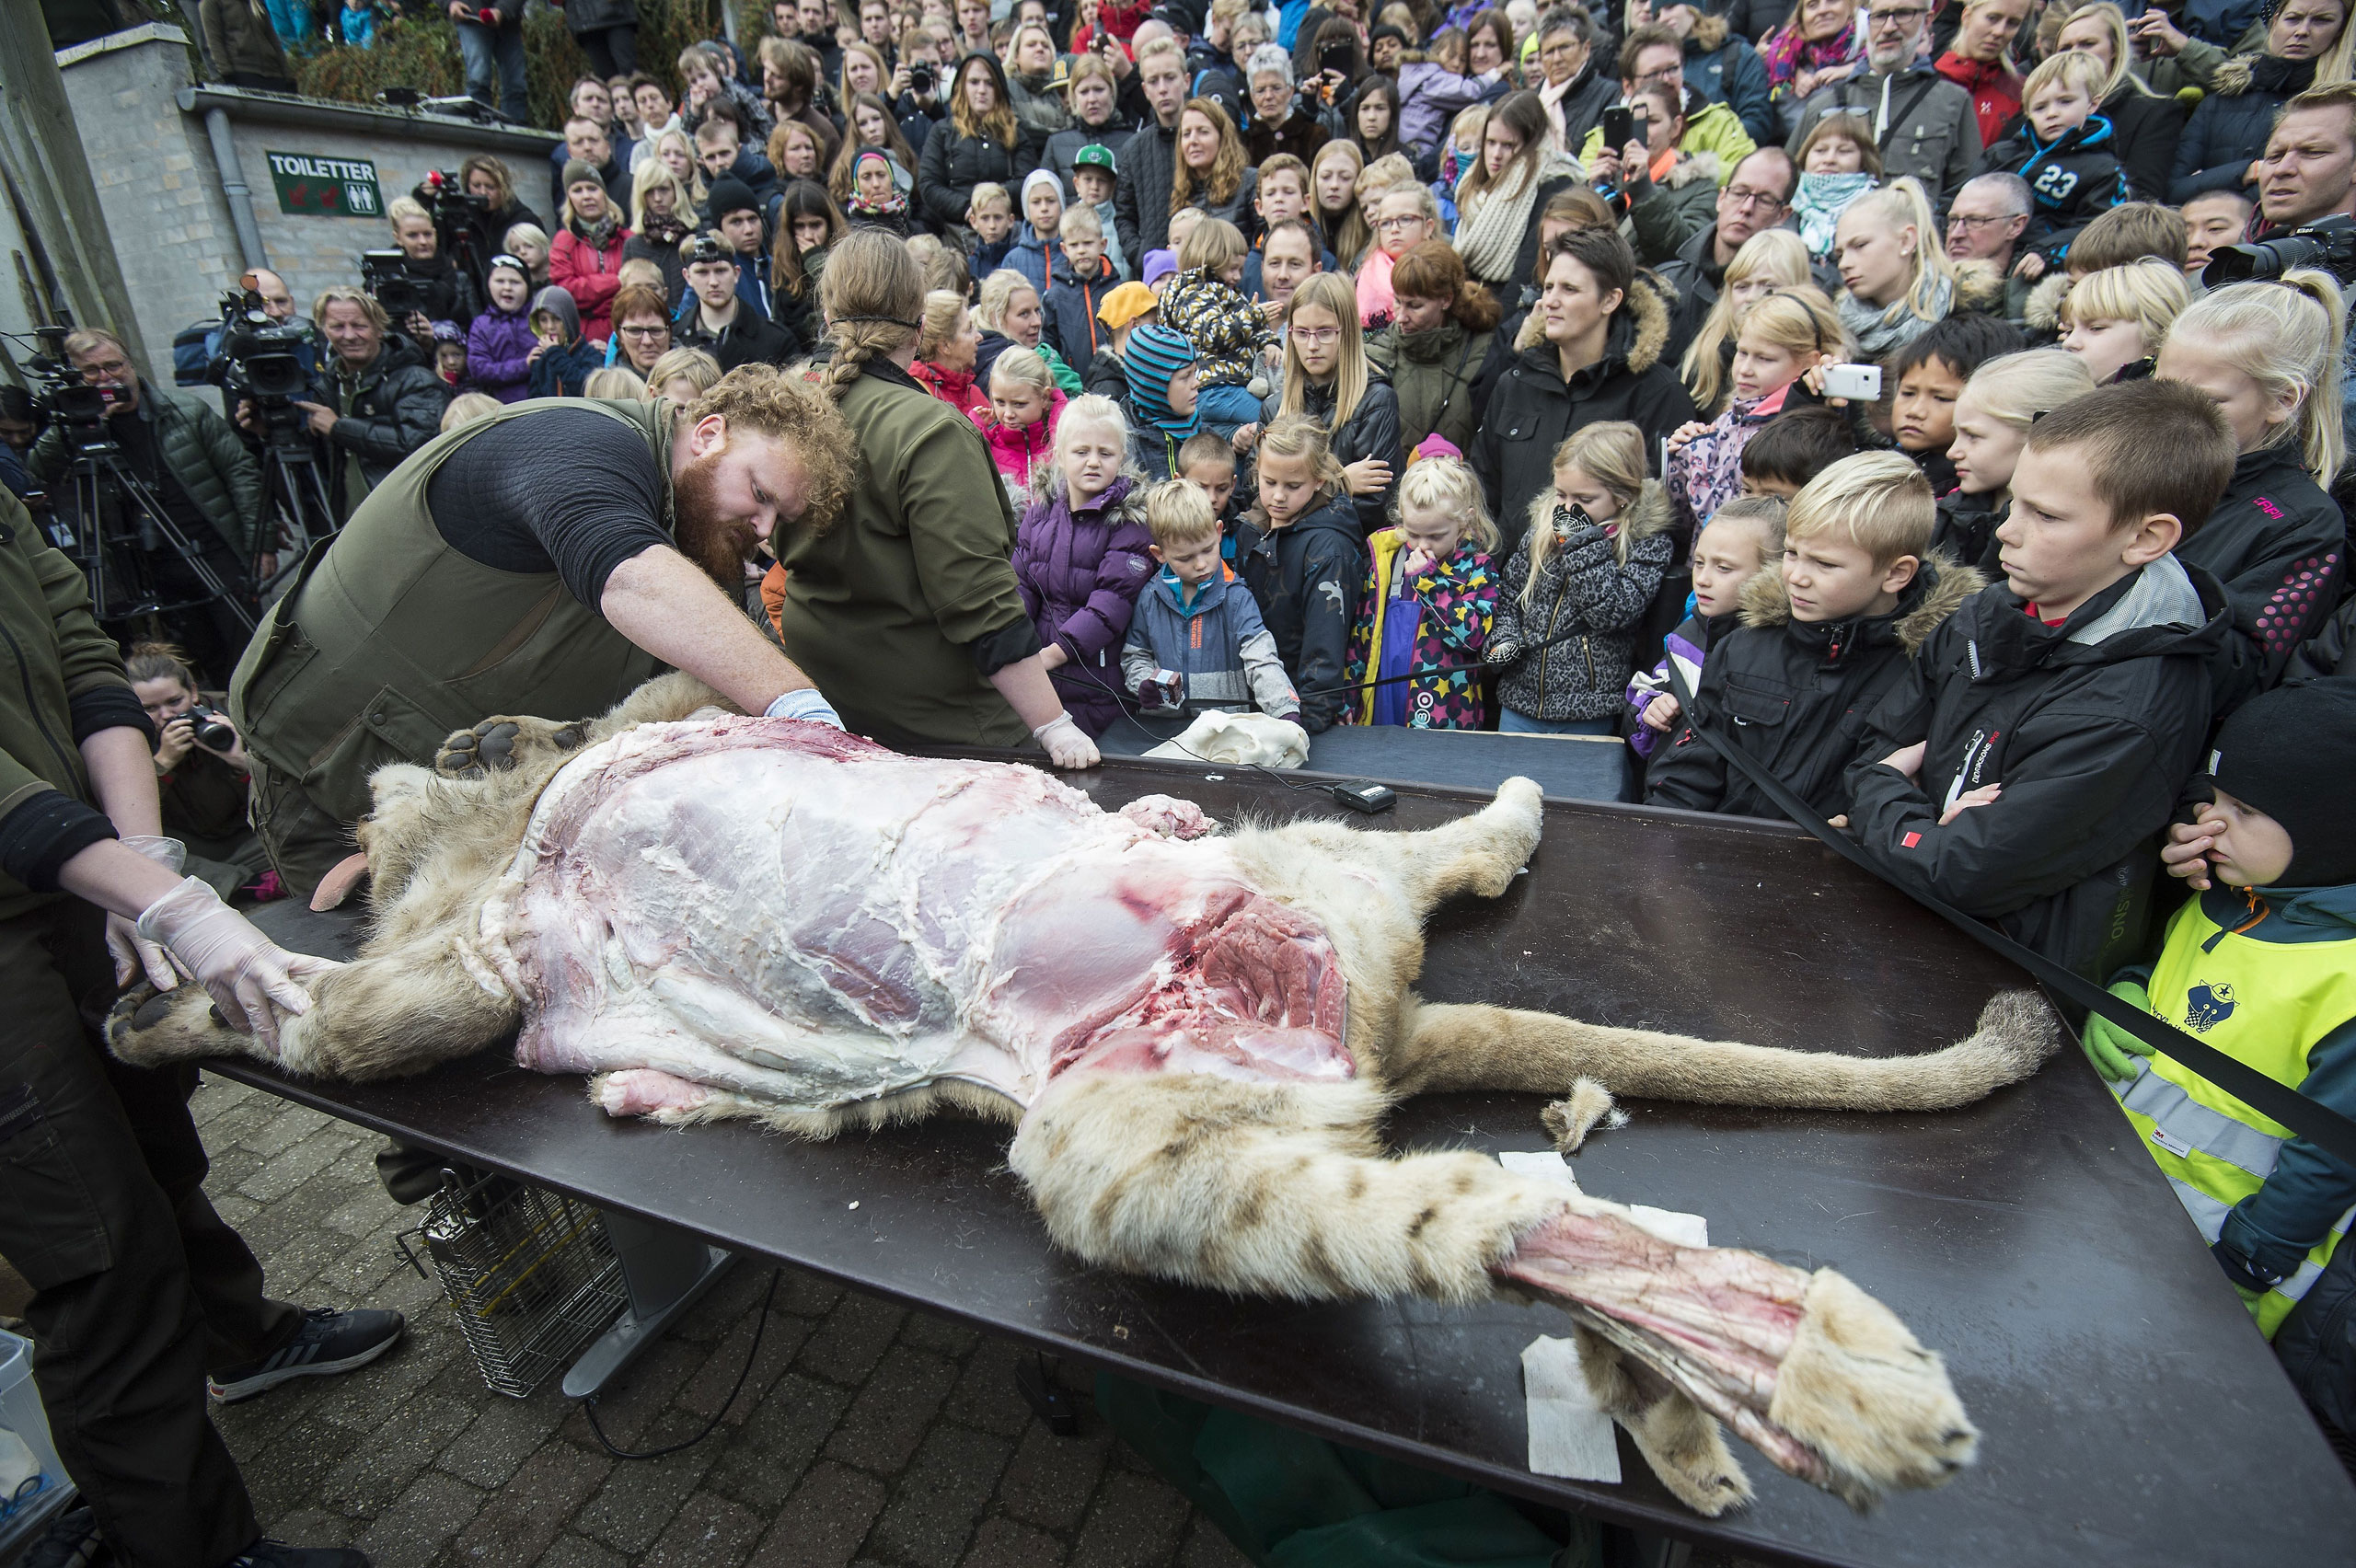 Rasmus Kolind work on the dissection of a lion as zoo visitors look on, at the zoo in Odense, Denmark, Oct. 15, 2015.